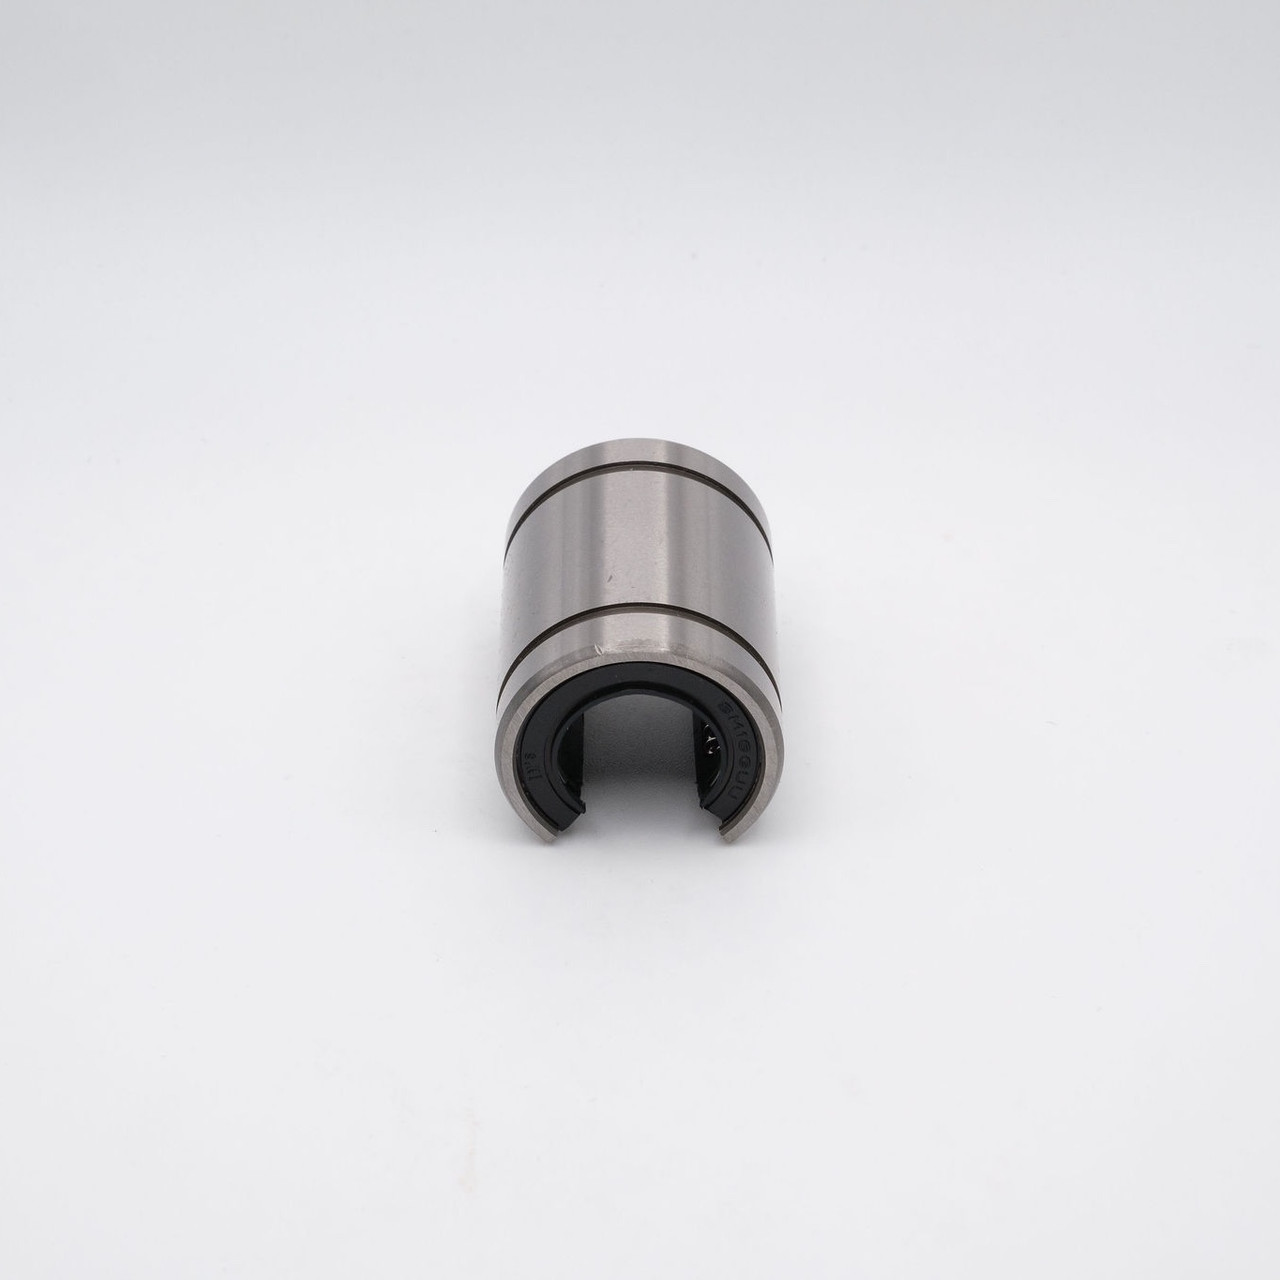 LM12UUOP Linear Ball Bushing Adjustable Type Bearing 12x21x30mm Top Front View